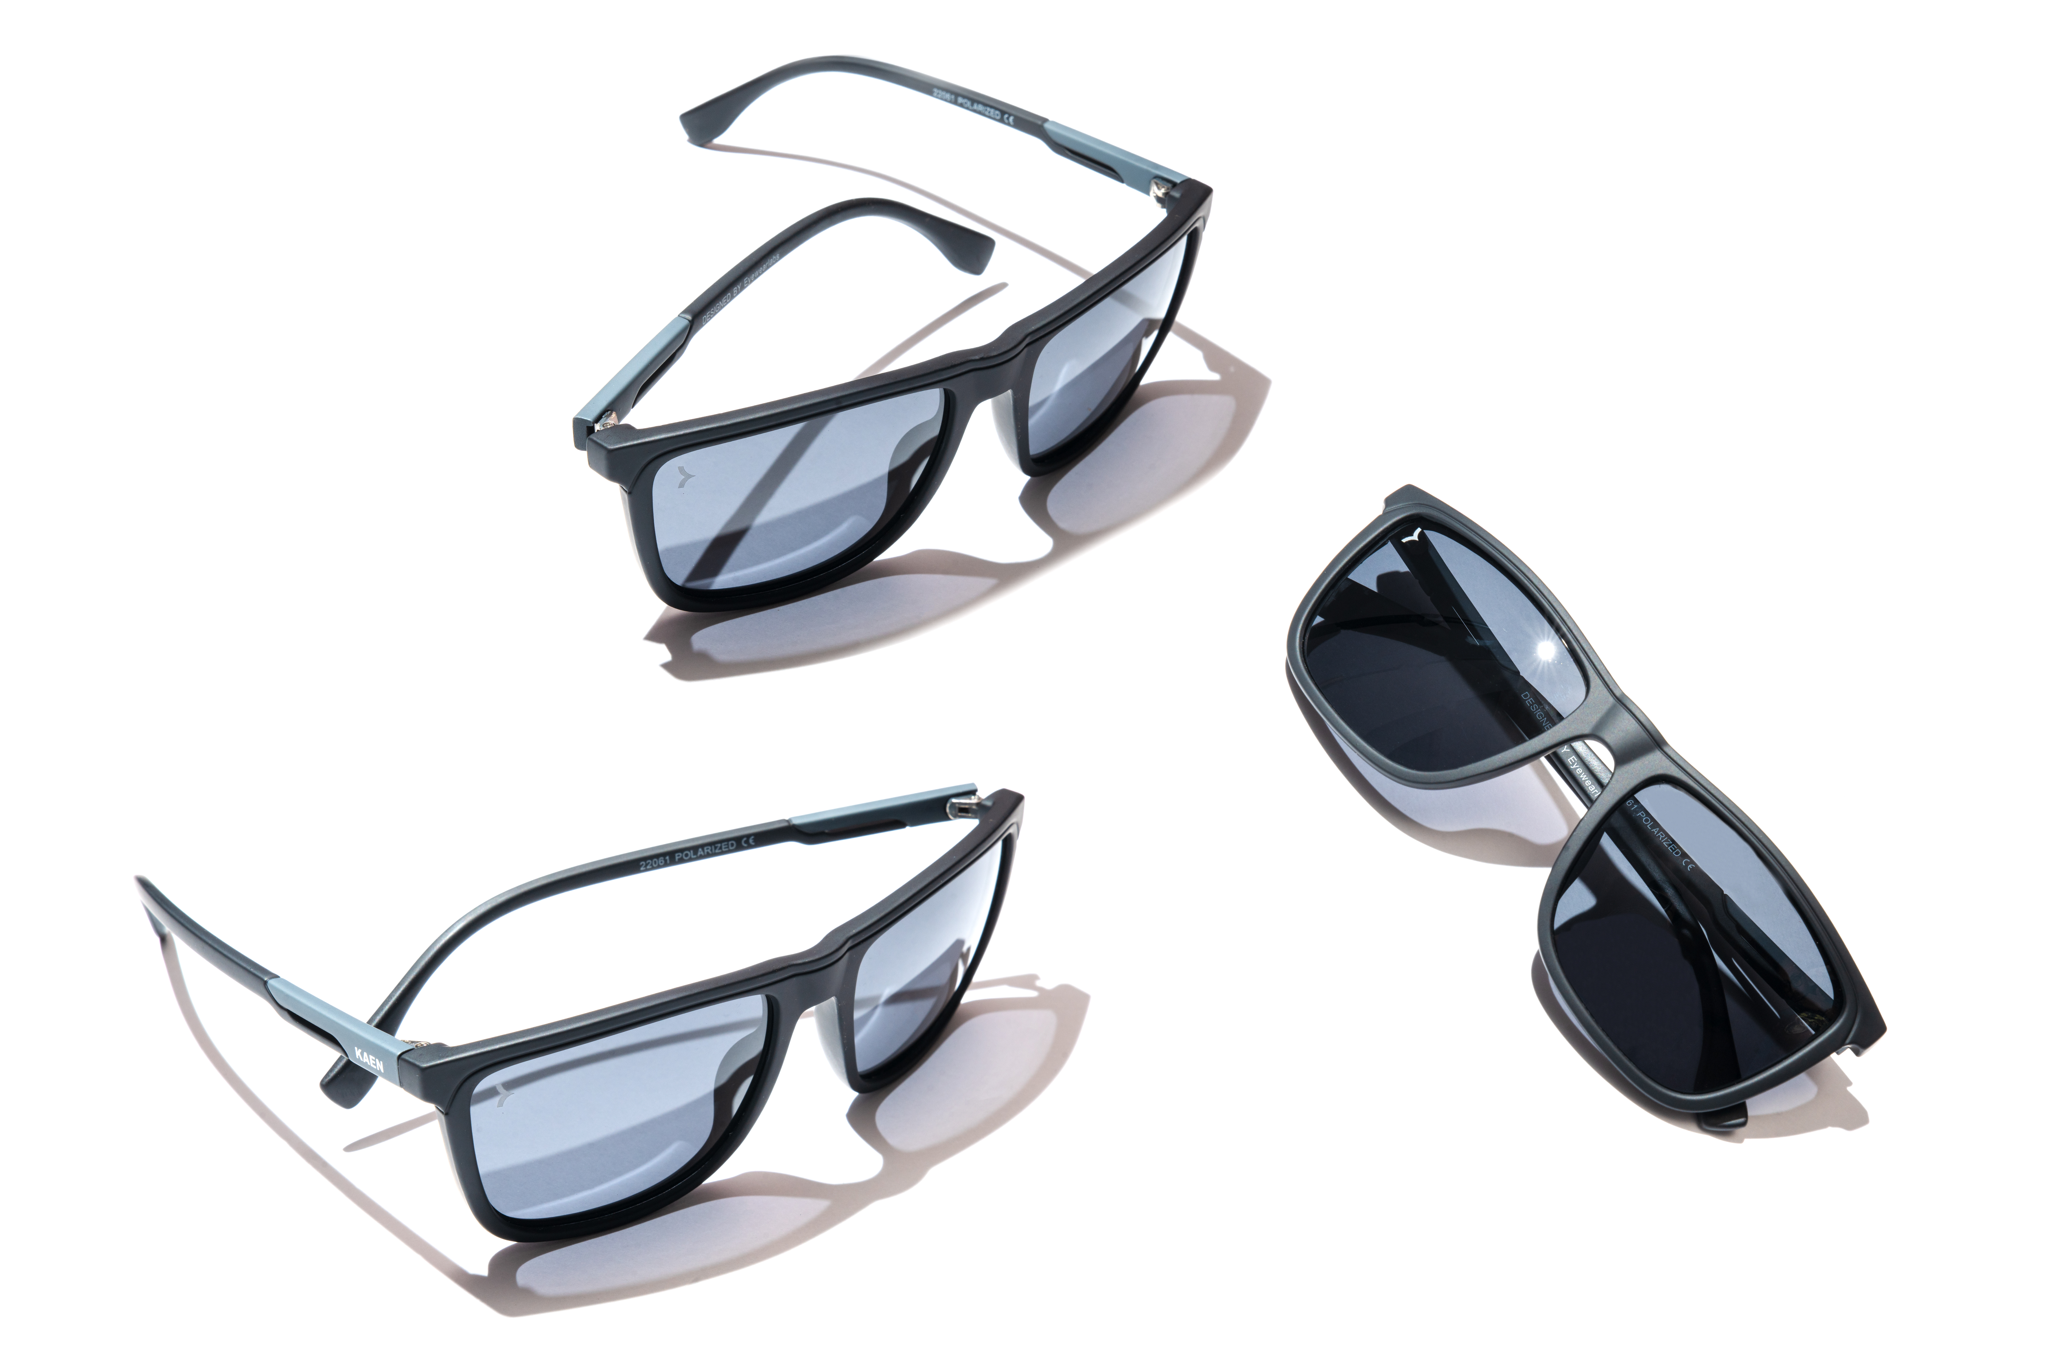 Three pairs of sunglasses in a row on a white background. From left to right, the first pair has a black frame and gray lenses, the second pair has a tortoiseshell frame and brown lenses, and the third pair has a gold frame and mirrored lenses.